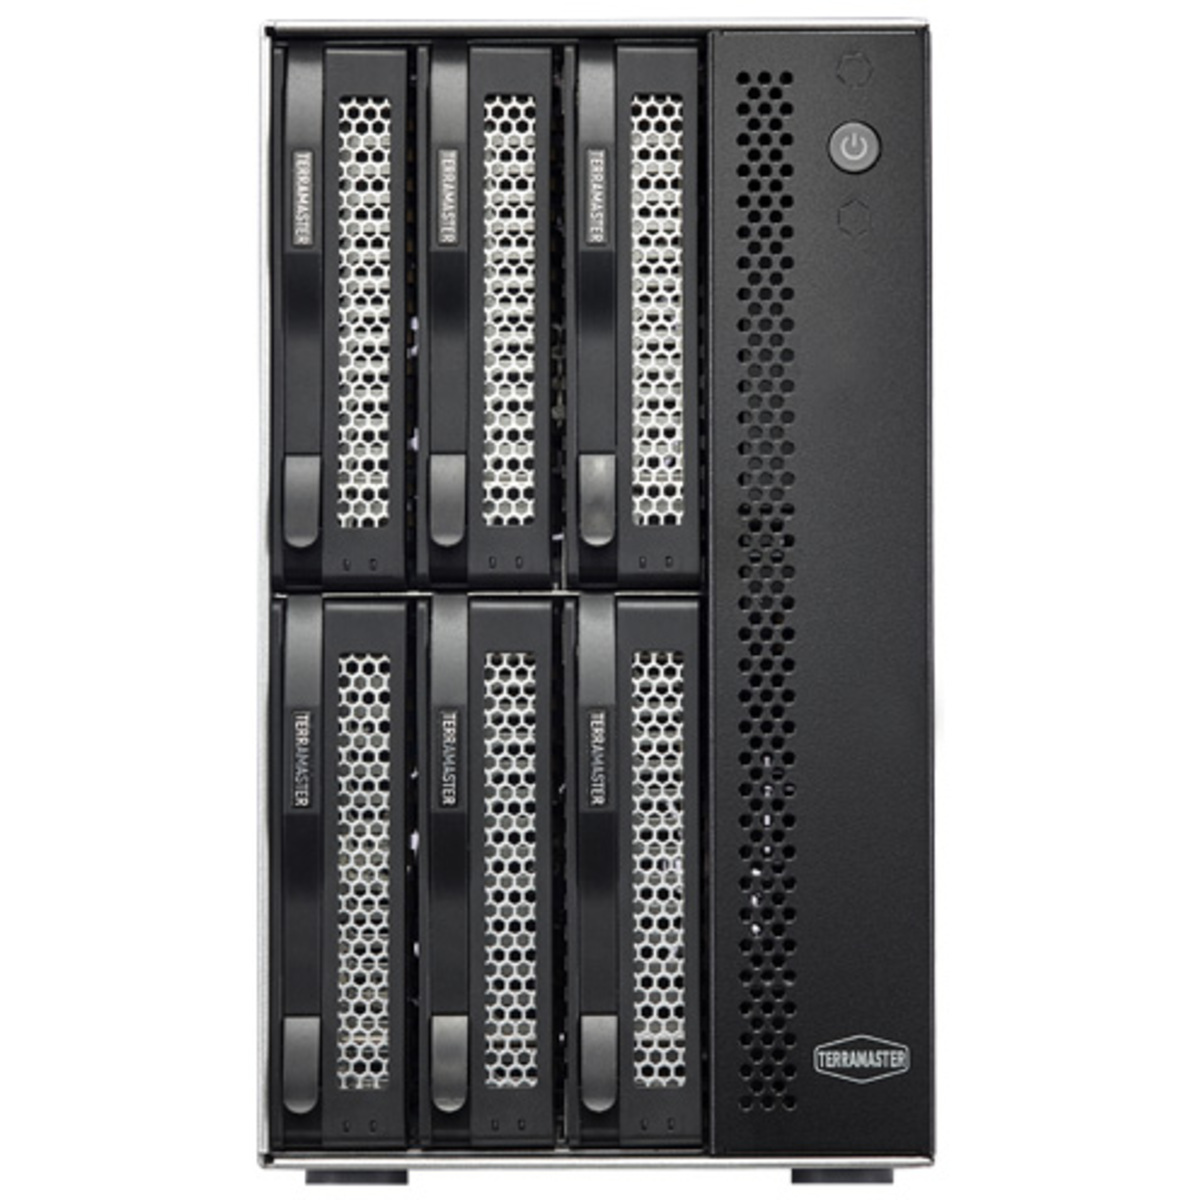 TerraMaster D6-320 40tb 6-Bay Desktop Multimedia / Power User / Business DAS - Direct Attached Storage Device 5x8tb TeamGroup EX2 Elite T253E2008T0C101 2.5 550/520MB/s SATA 6Gb/s SSD CONSUMER Class Drives Installed - Burn-In Tested D6-320